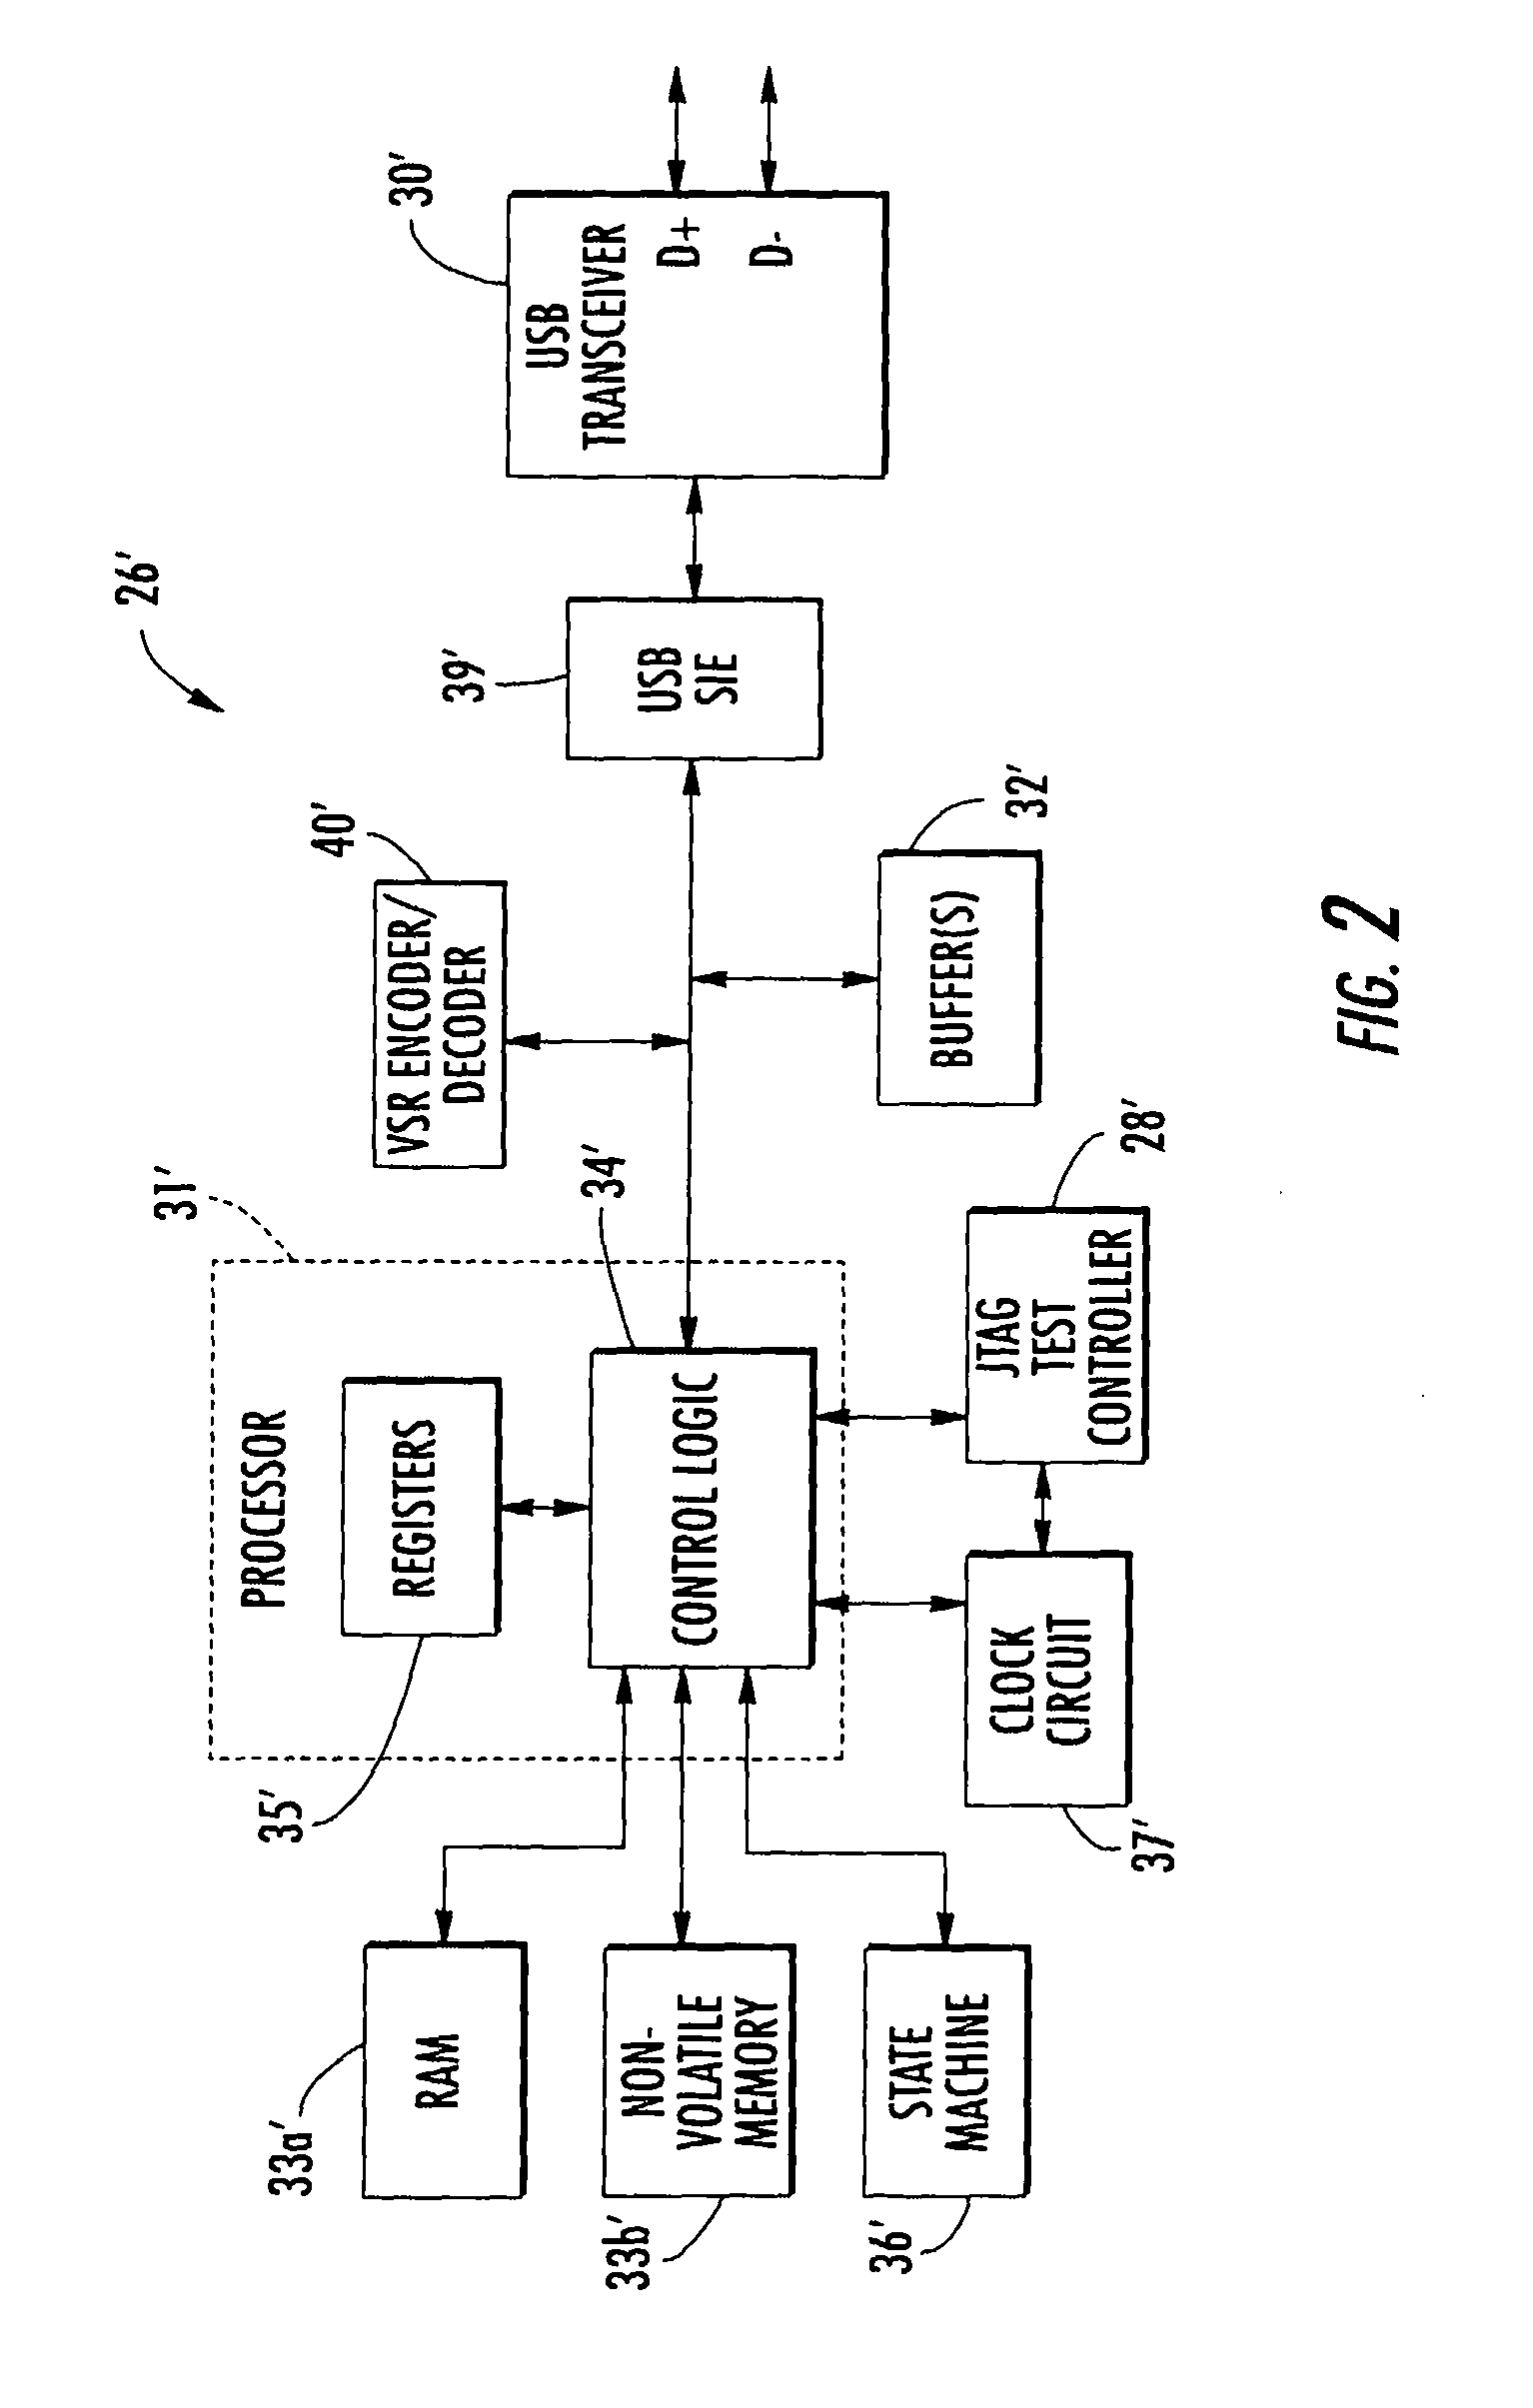 Smart card including a JTAG test controller and related methods